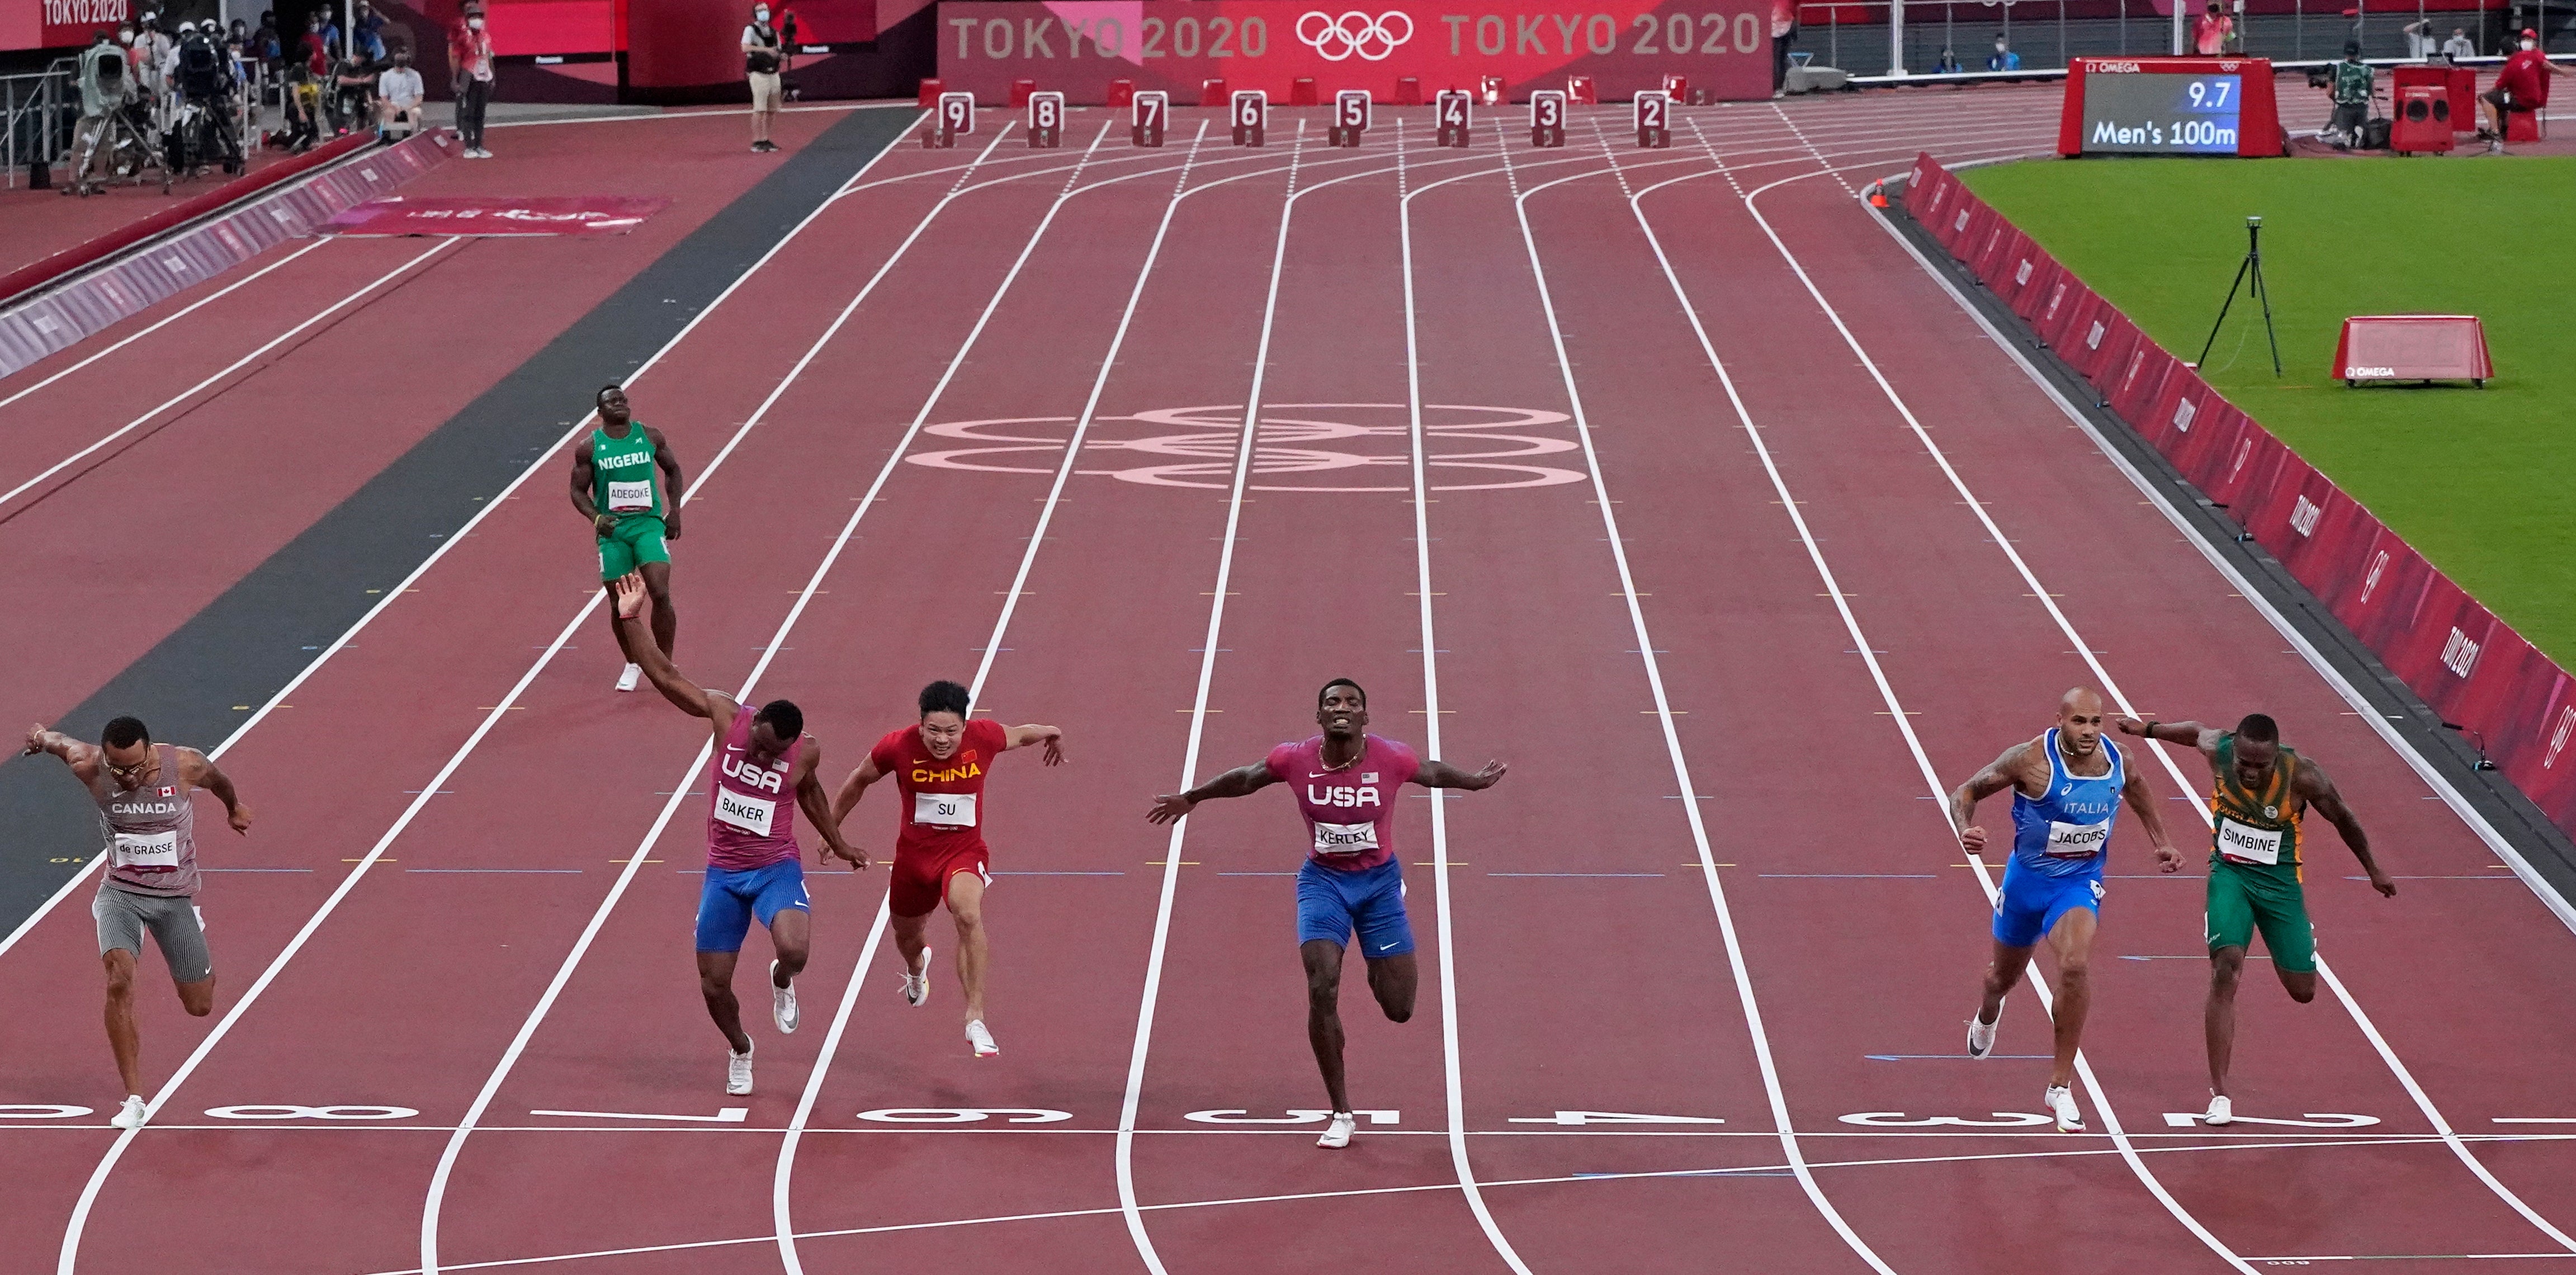 Lamont Marcell Jacobs, of Italy, second right, crosses the line to win the gold medal in the final of the men's 100-meters at the 2020 Summer Olympics in Tokyo. The heat in Paris Olympics is expected to be worse than the last Olympics.